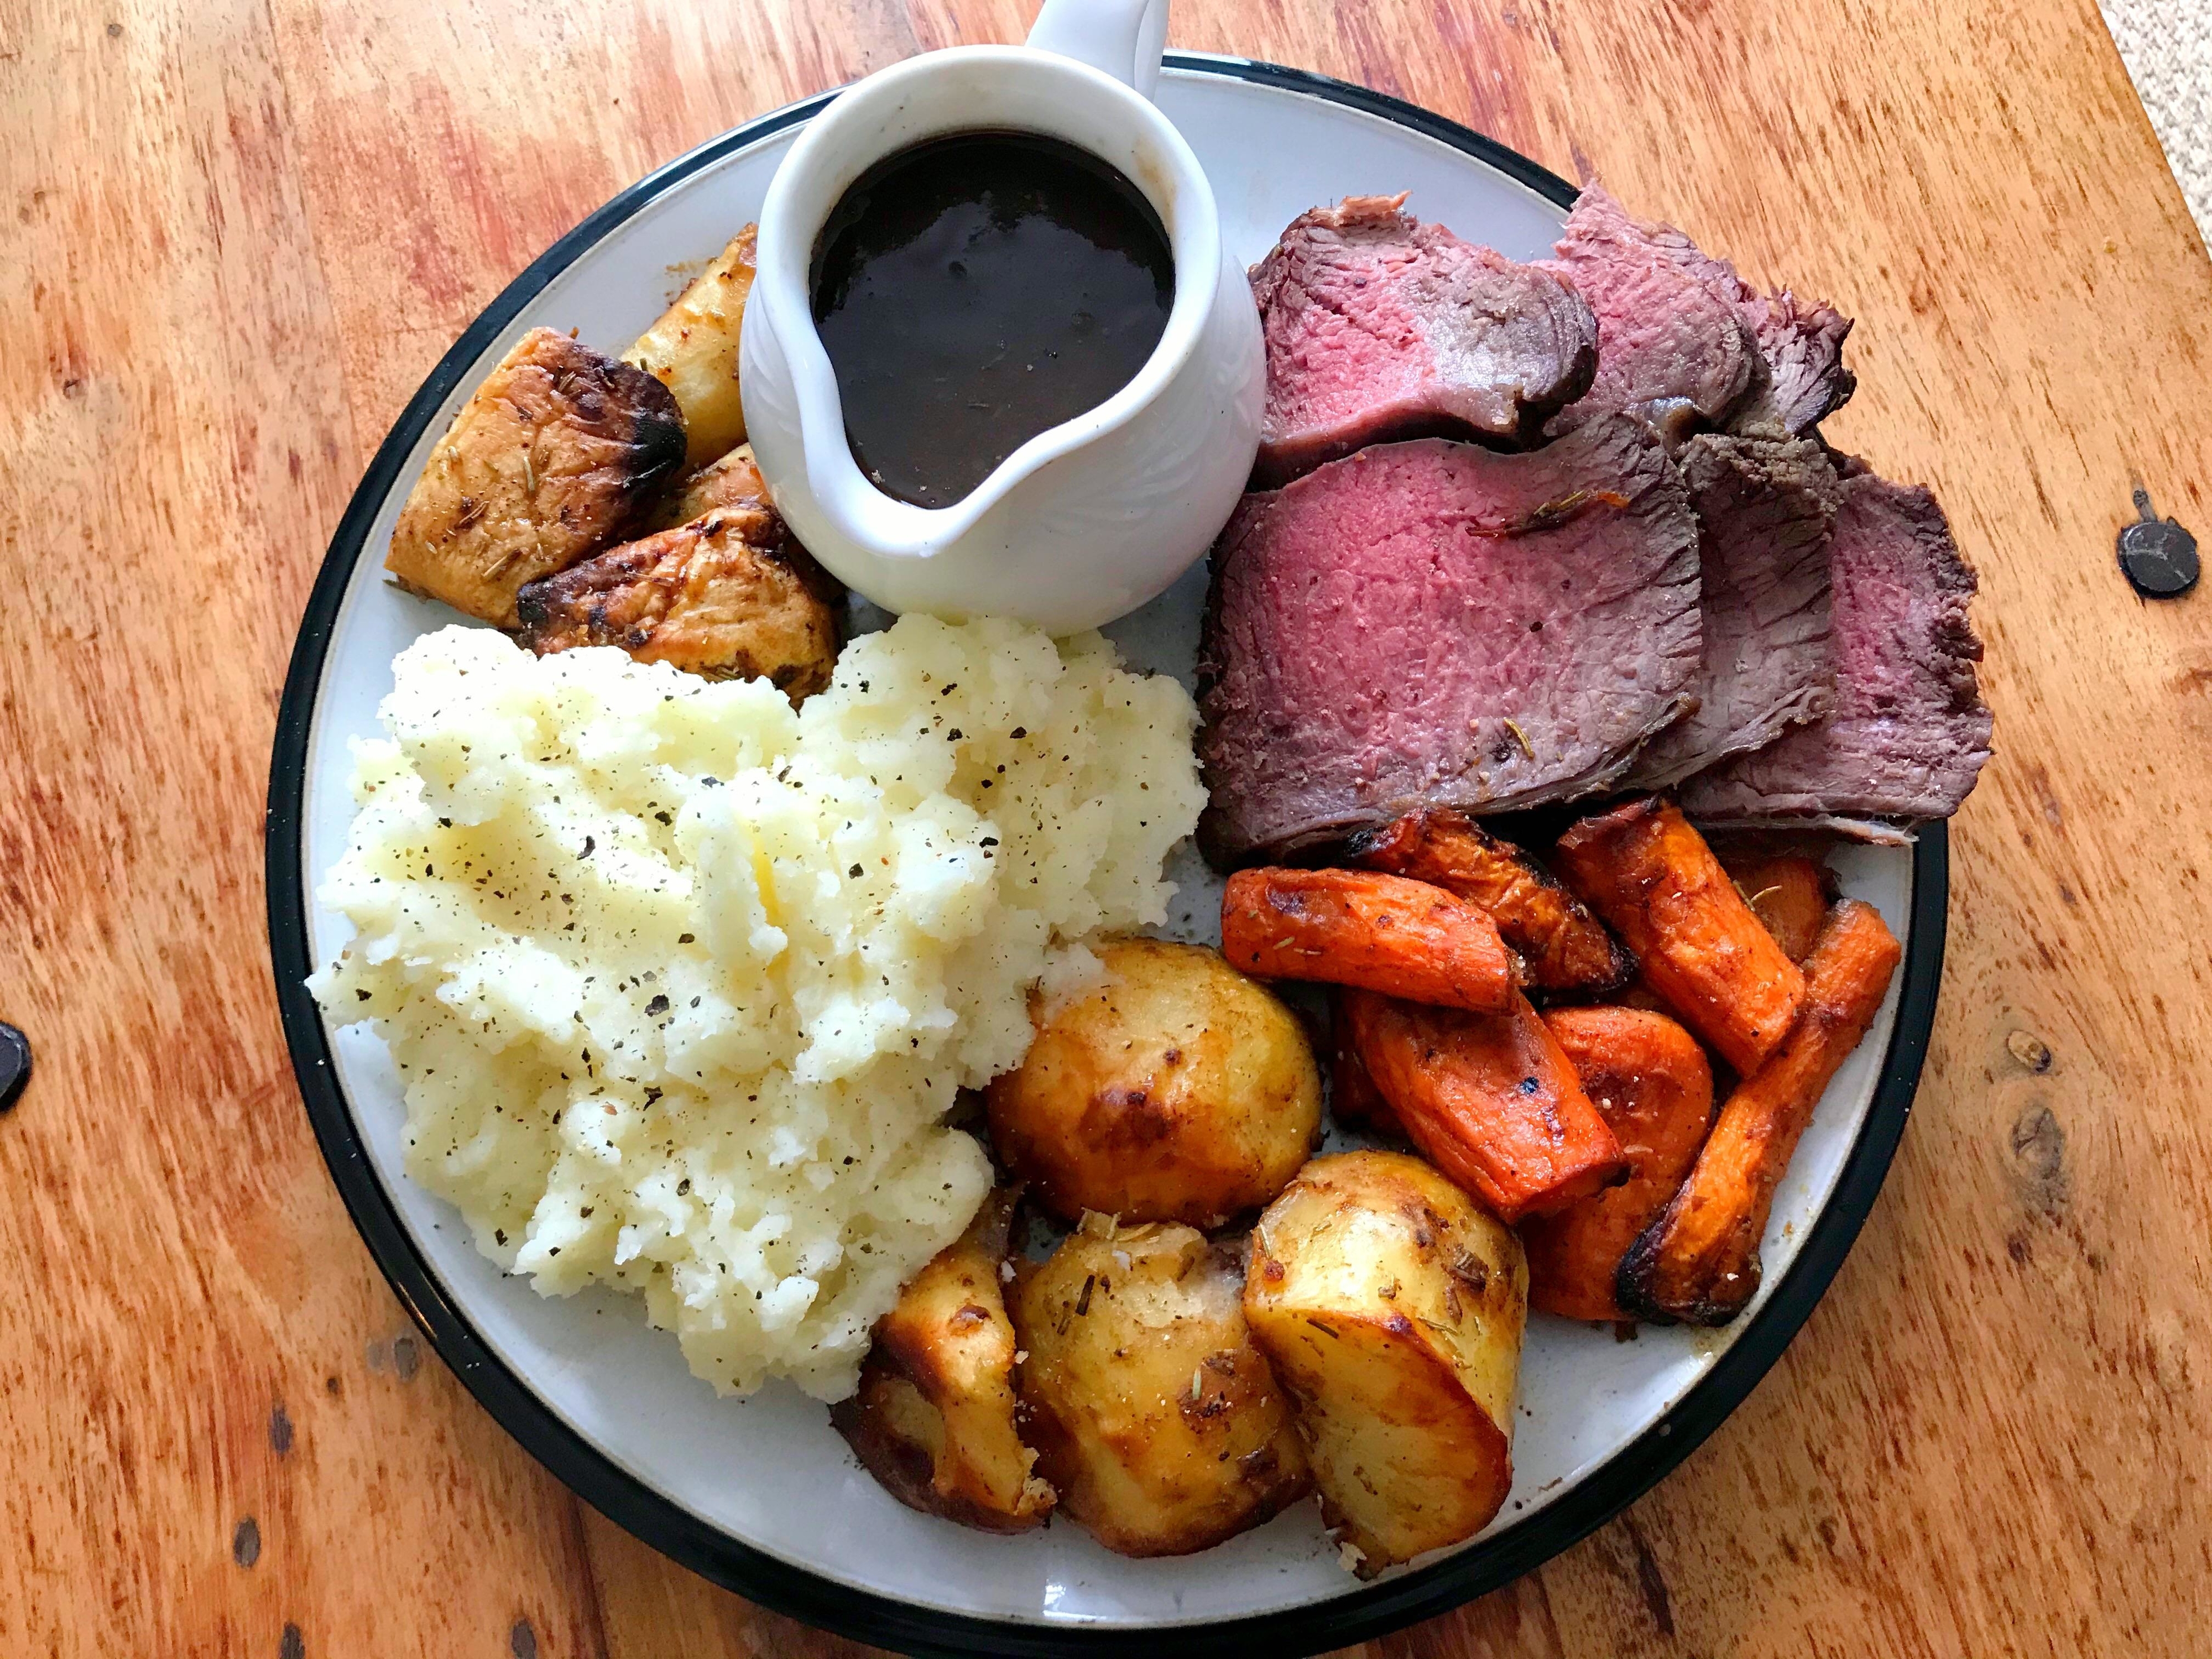 a plate with roasted meat, vegetables, and mashed potatoes